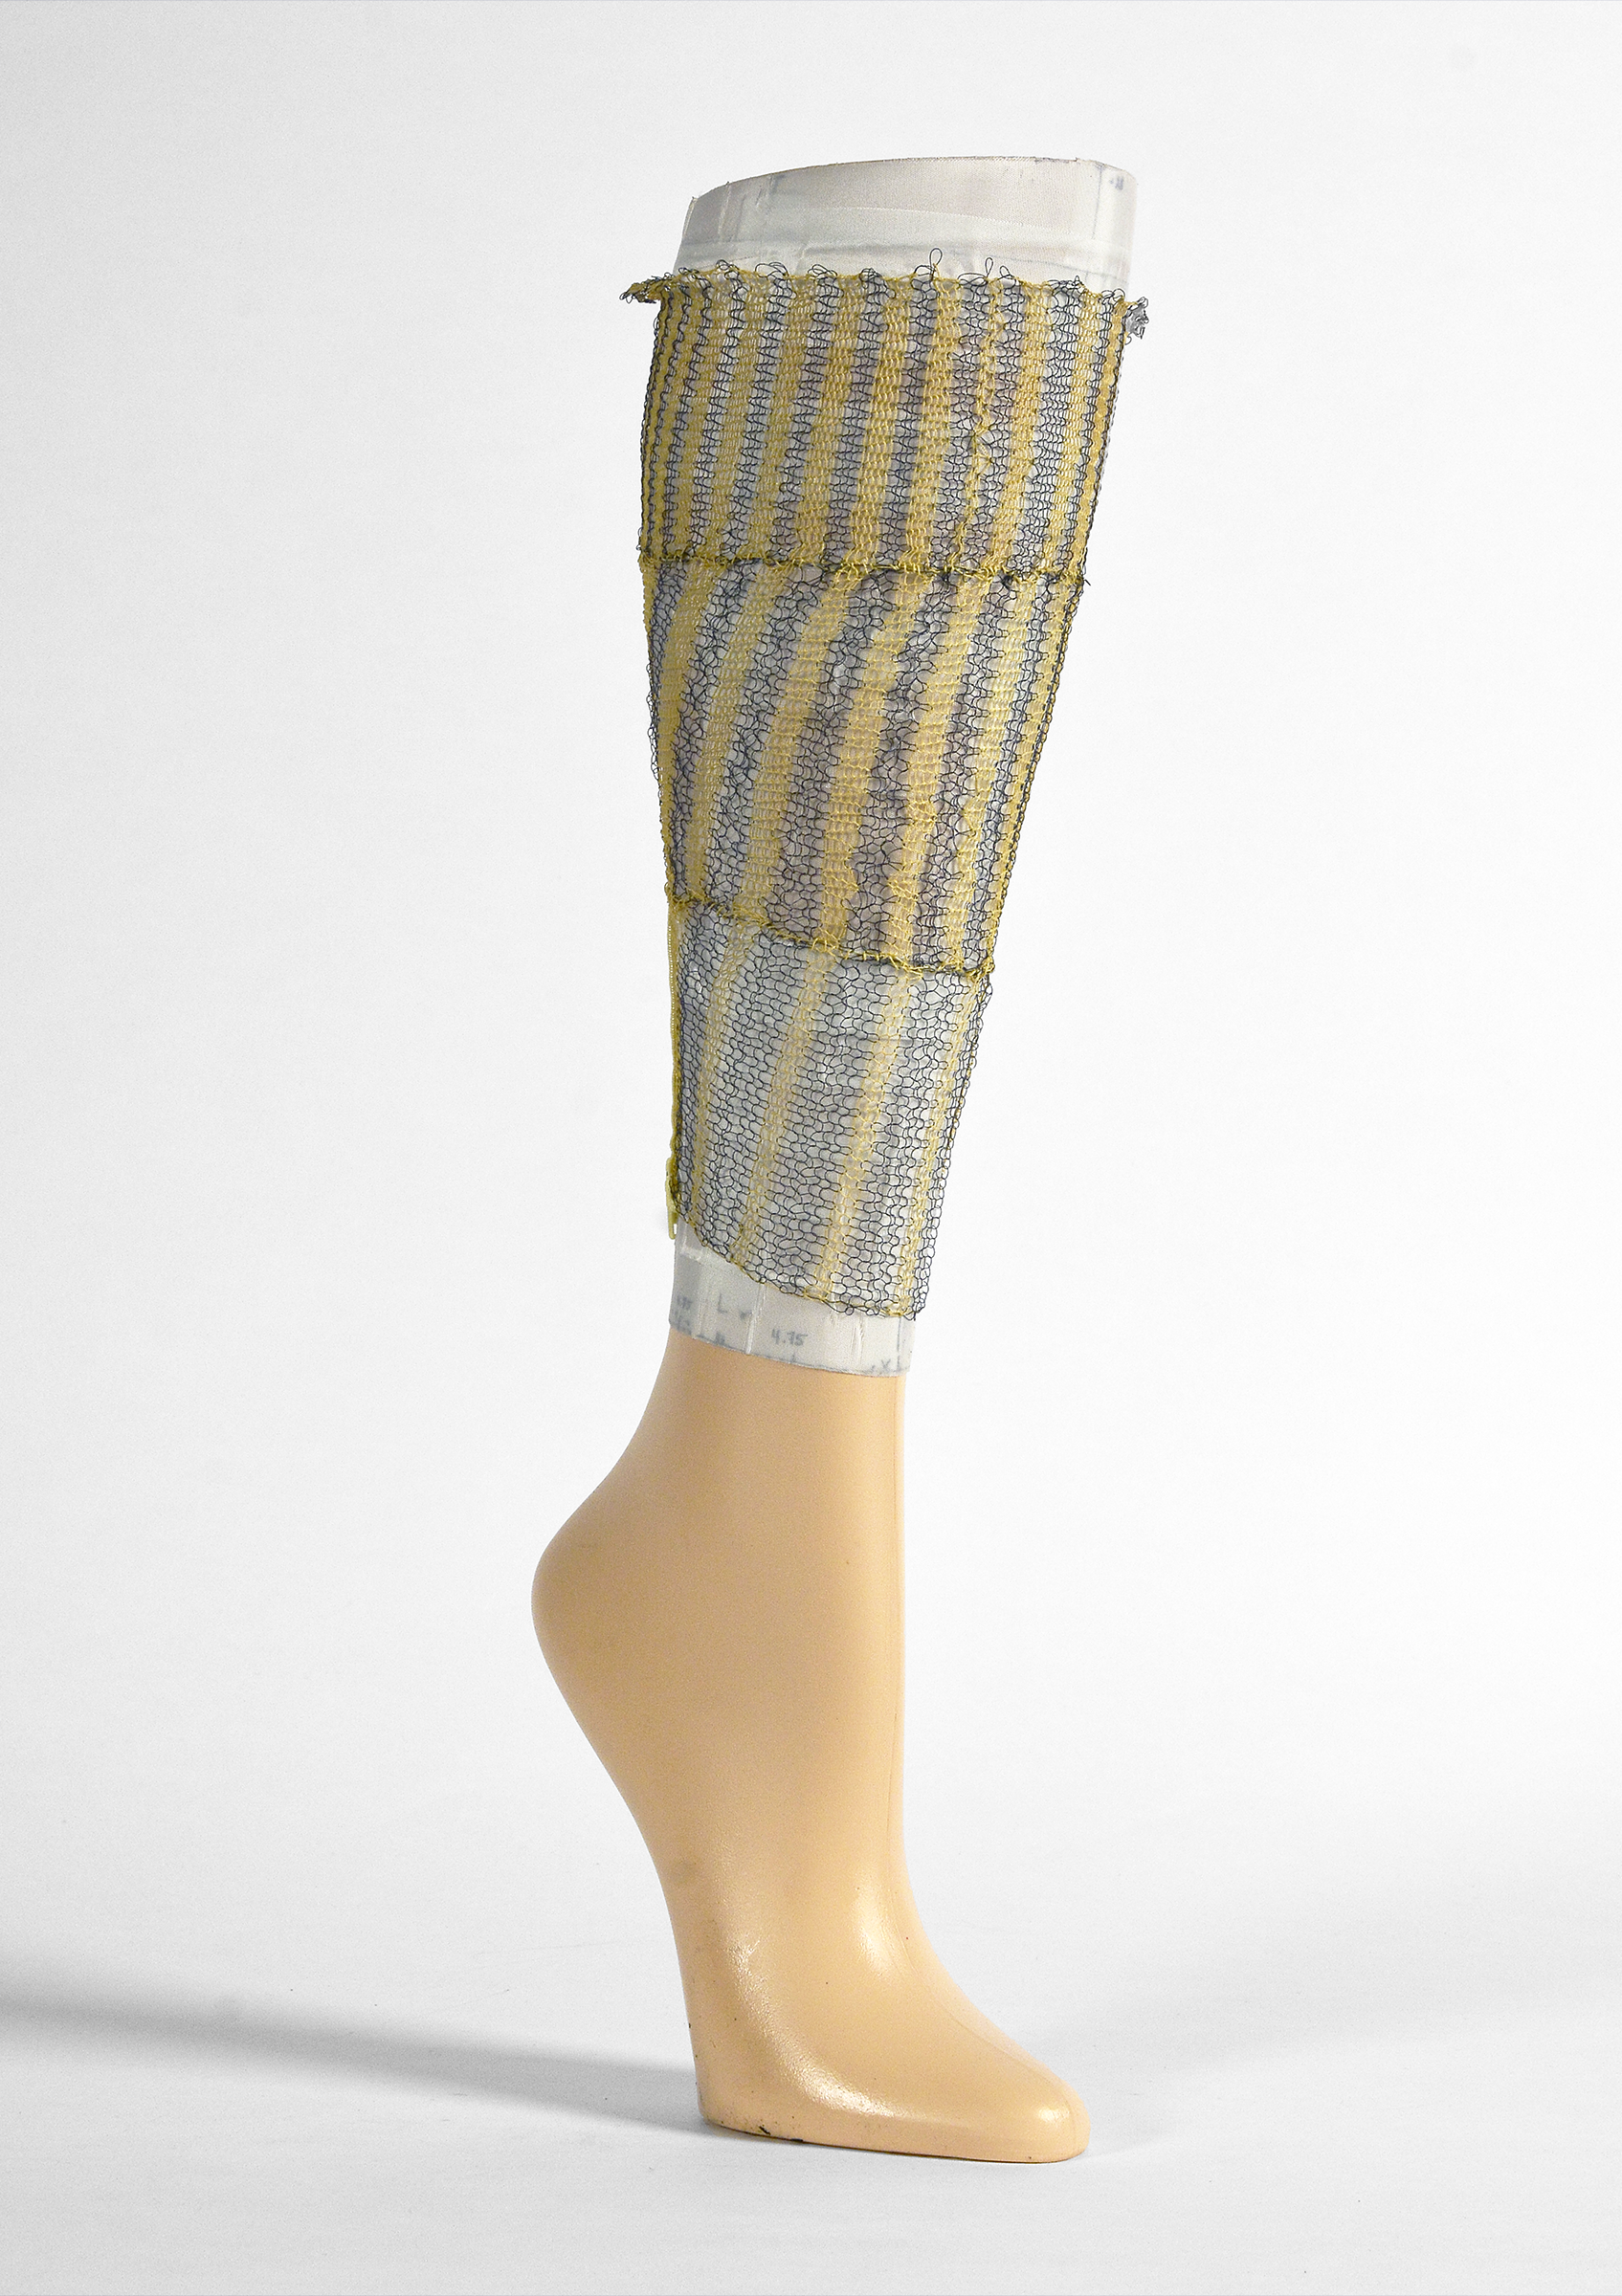 An artificial leg with knit fabric wrapped around the calf